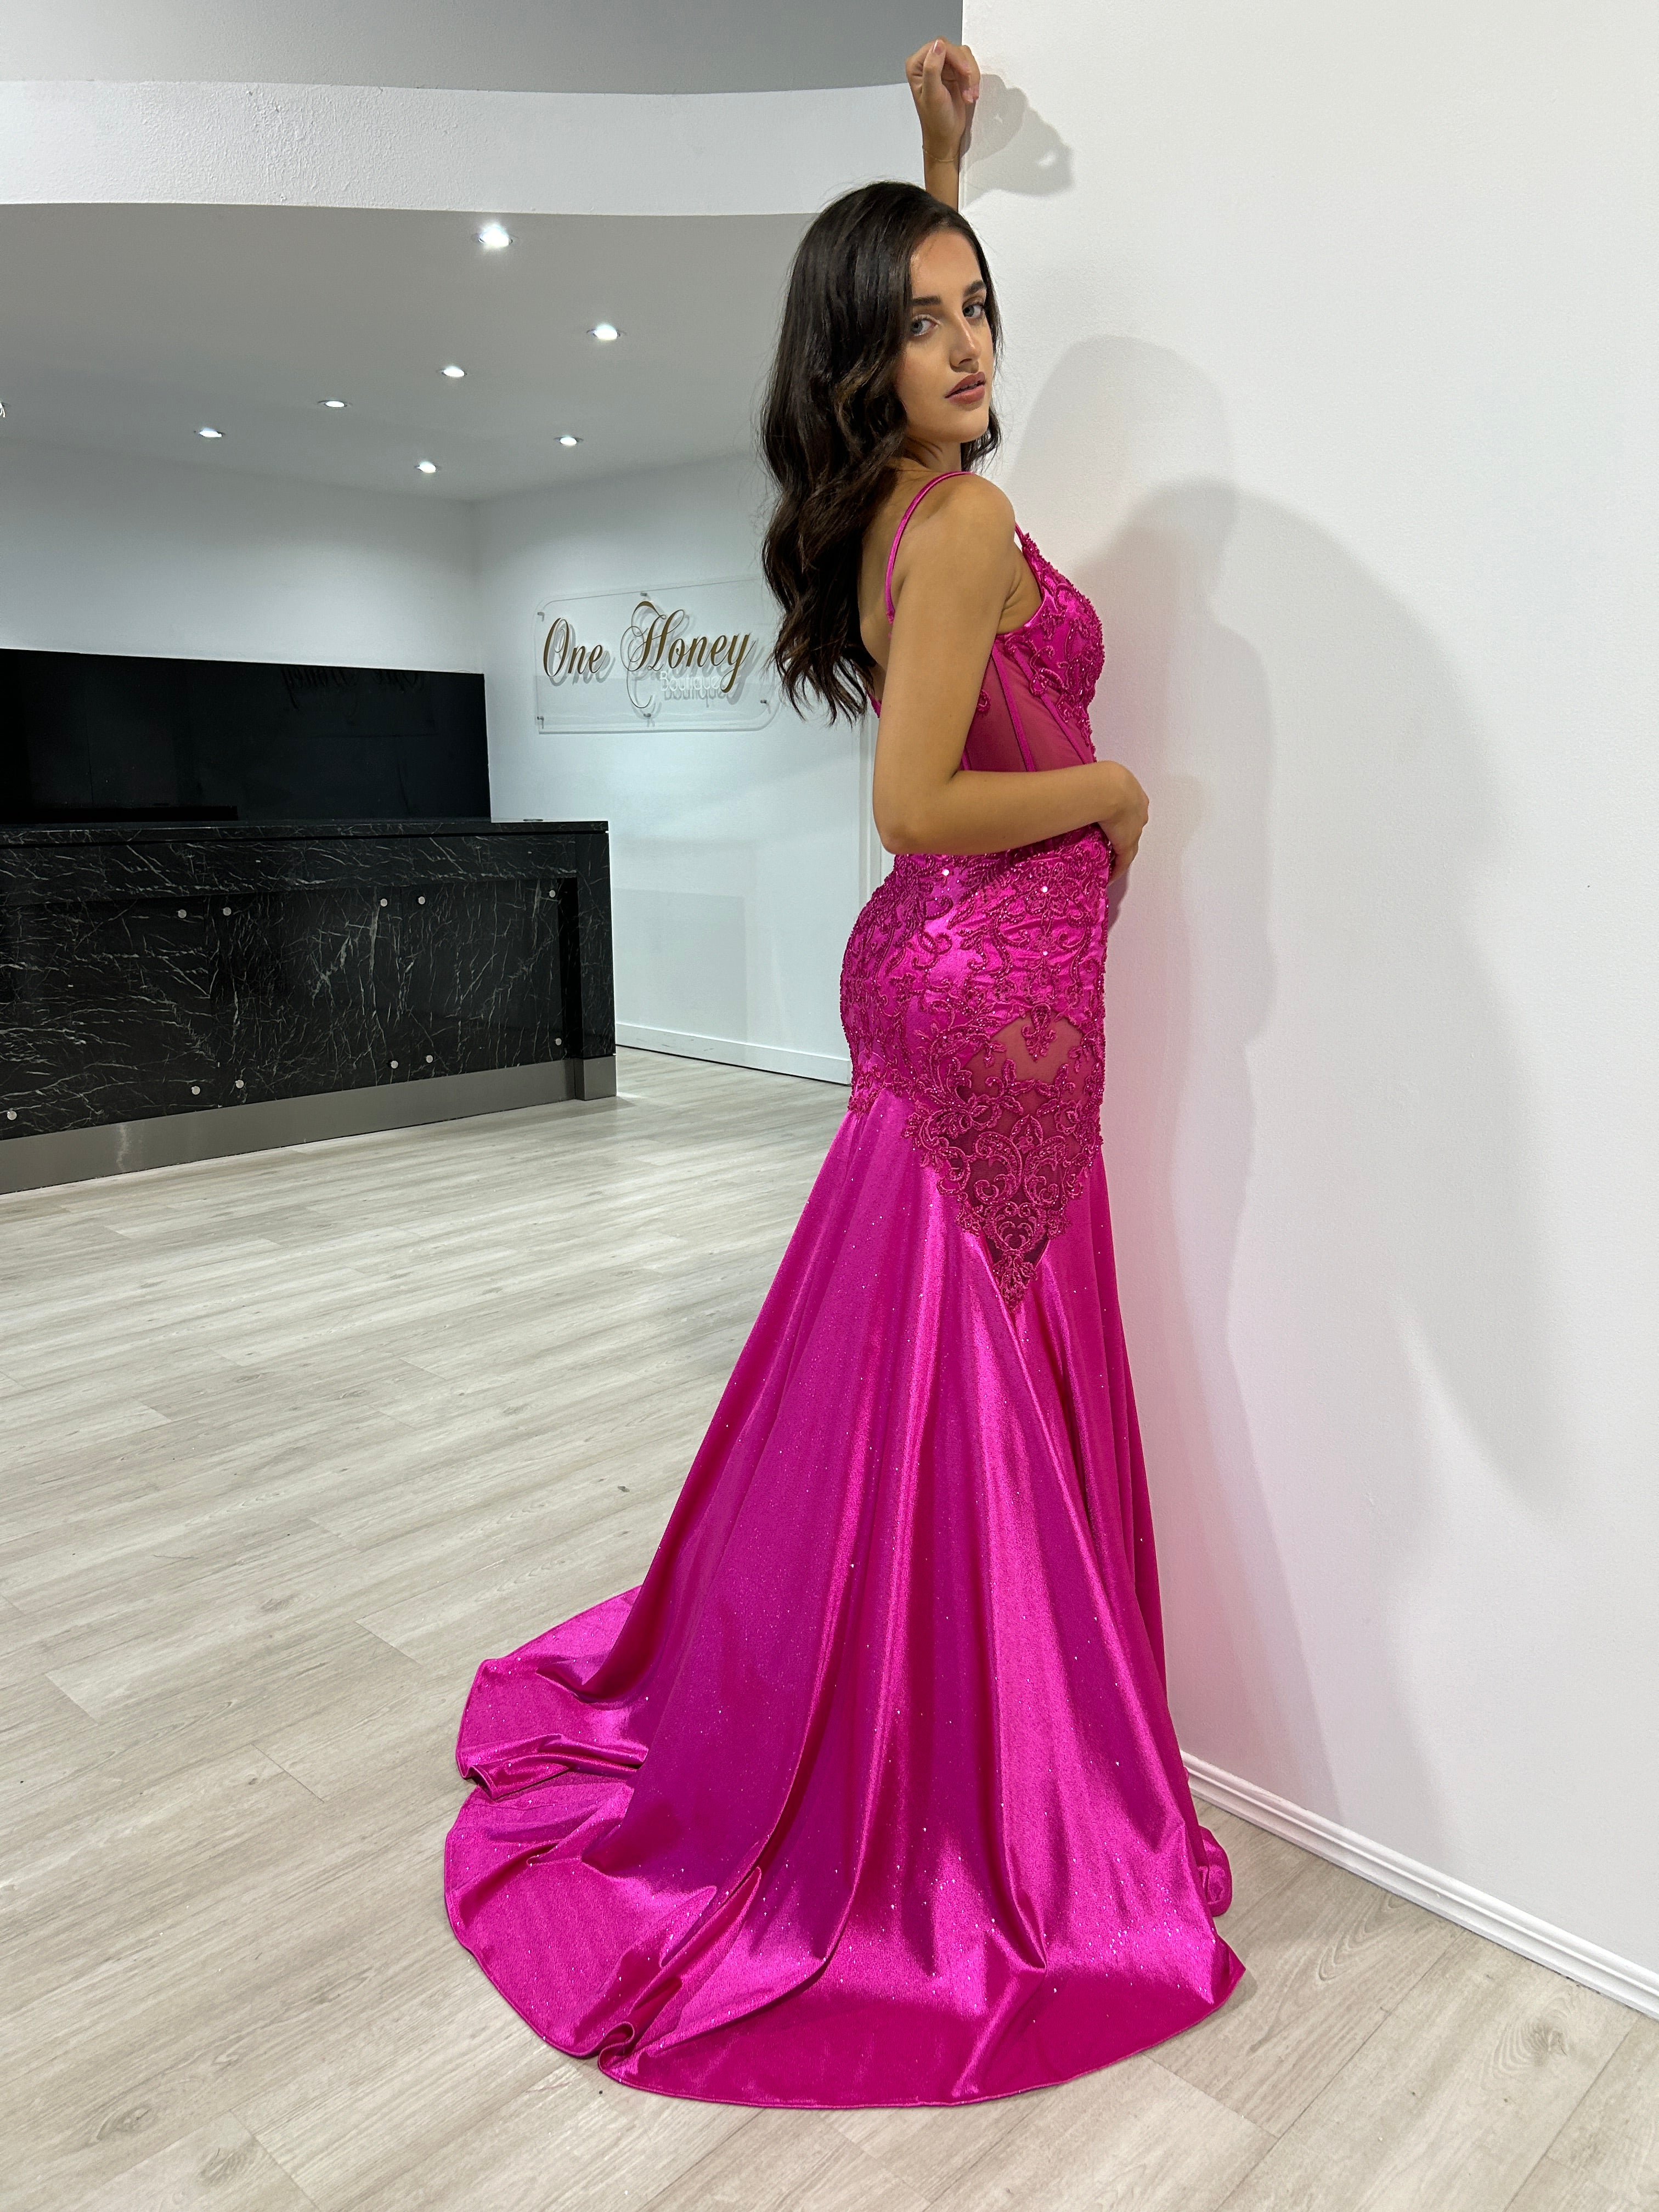 Honey Couture JEAN Fuchsia Lace and Glitter Fishtail Mermaid Formal Dress